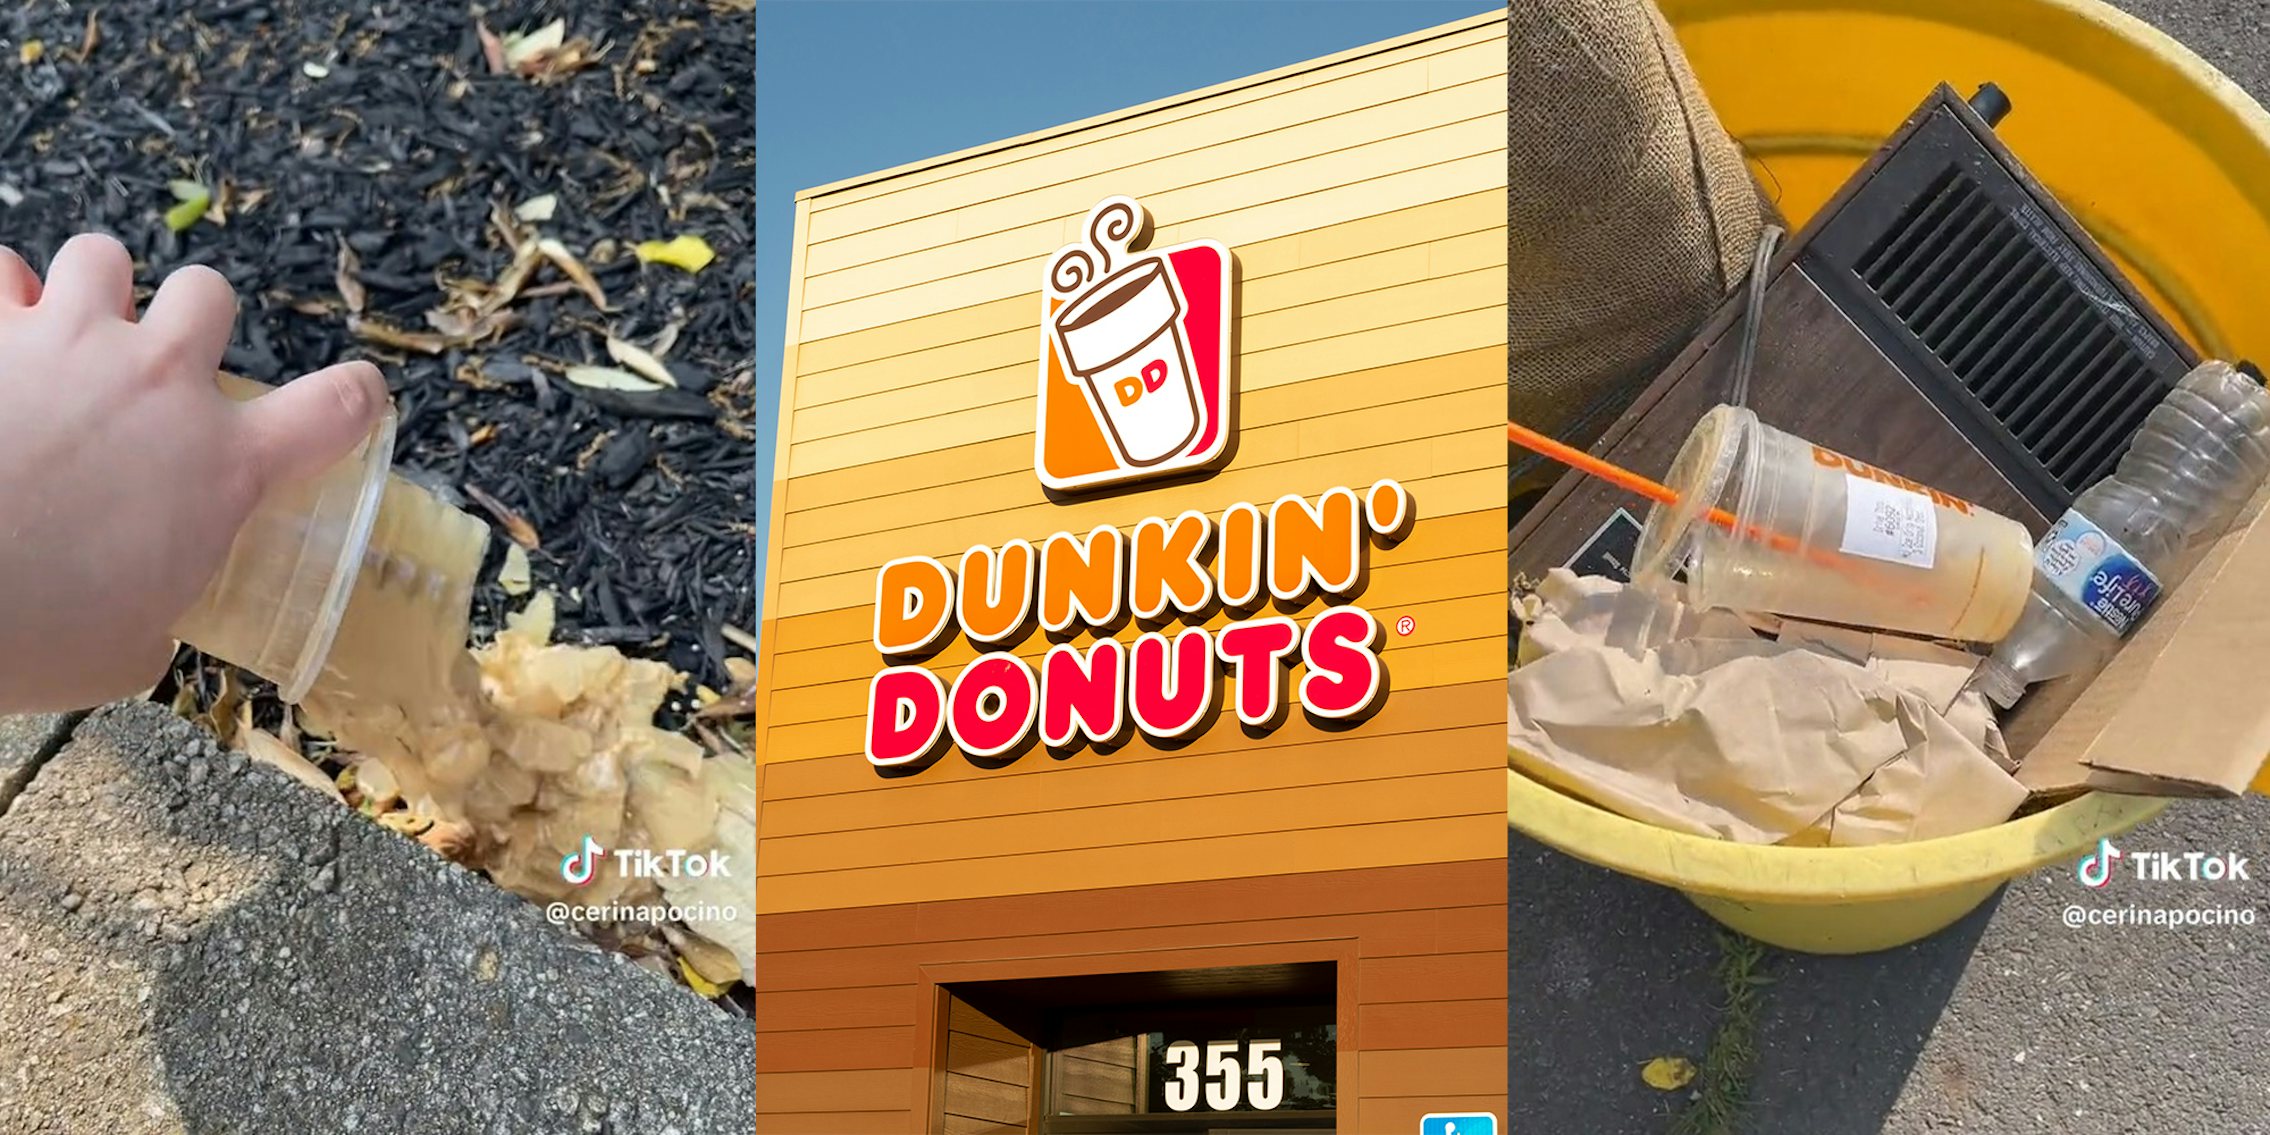 Customer dumps out Dunkin' iced coffee after claiming it was 'burnt'